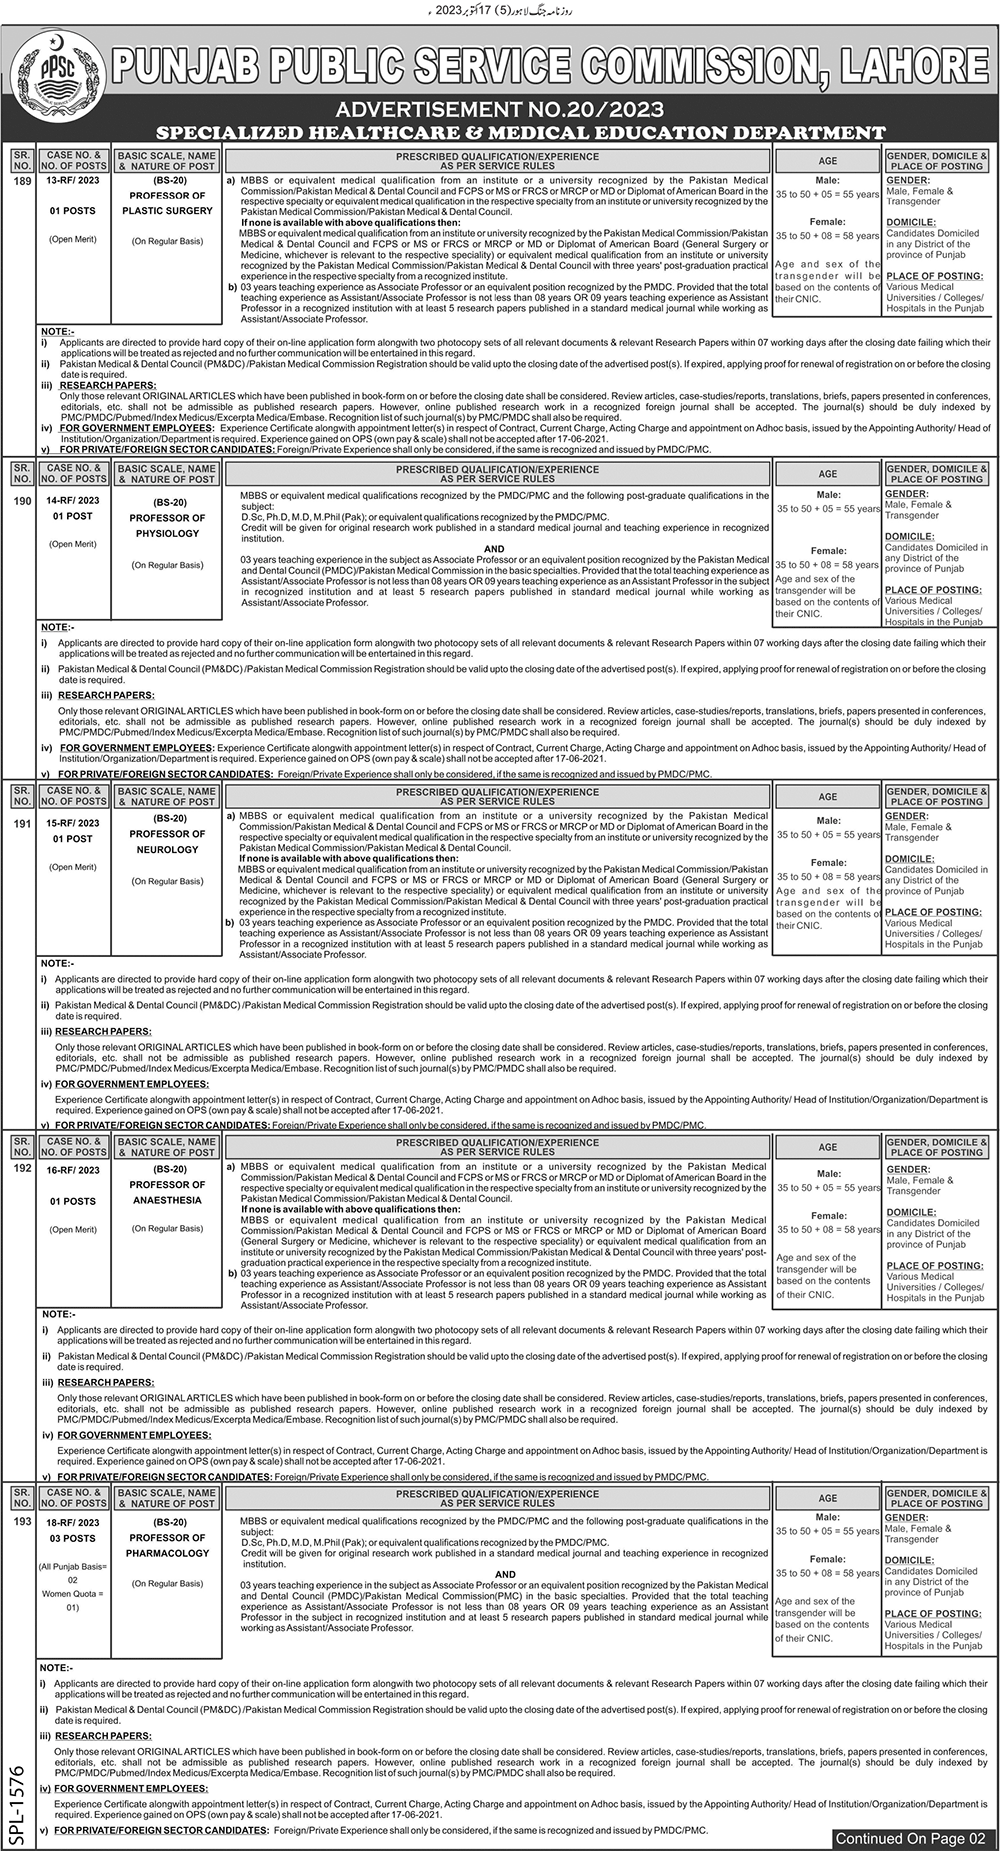 Health Department and Libraries Department Vacancies through PPSC Ad No. 20 / 2023 